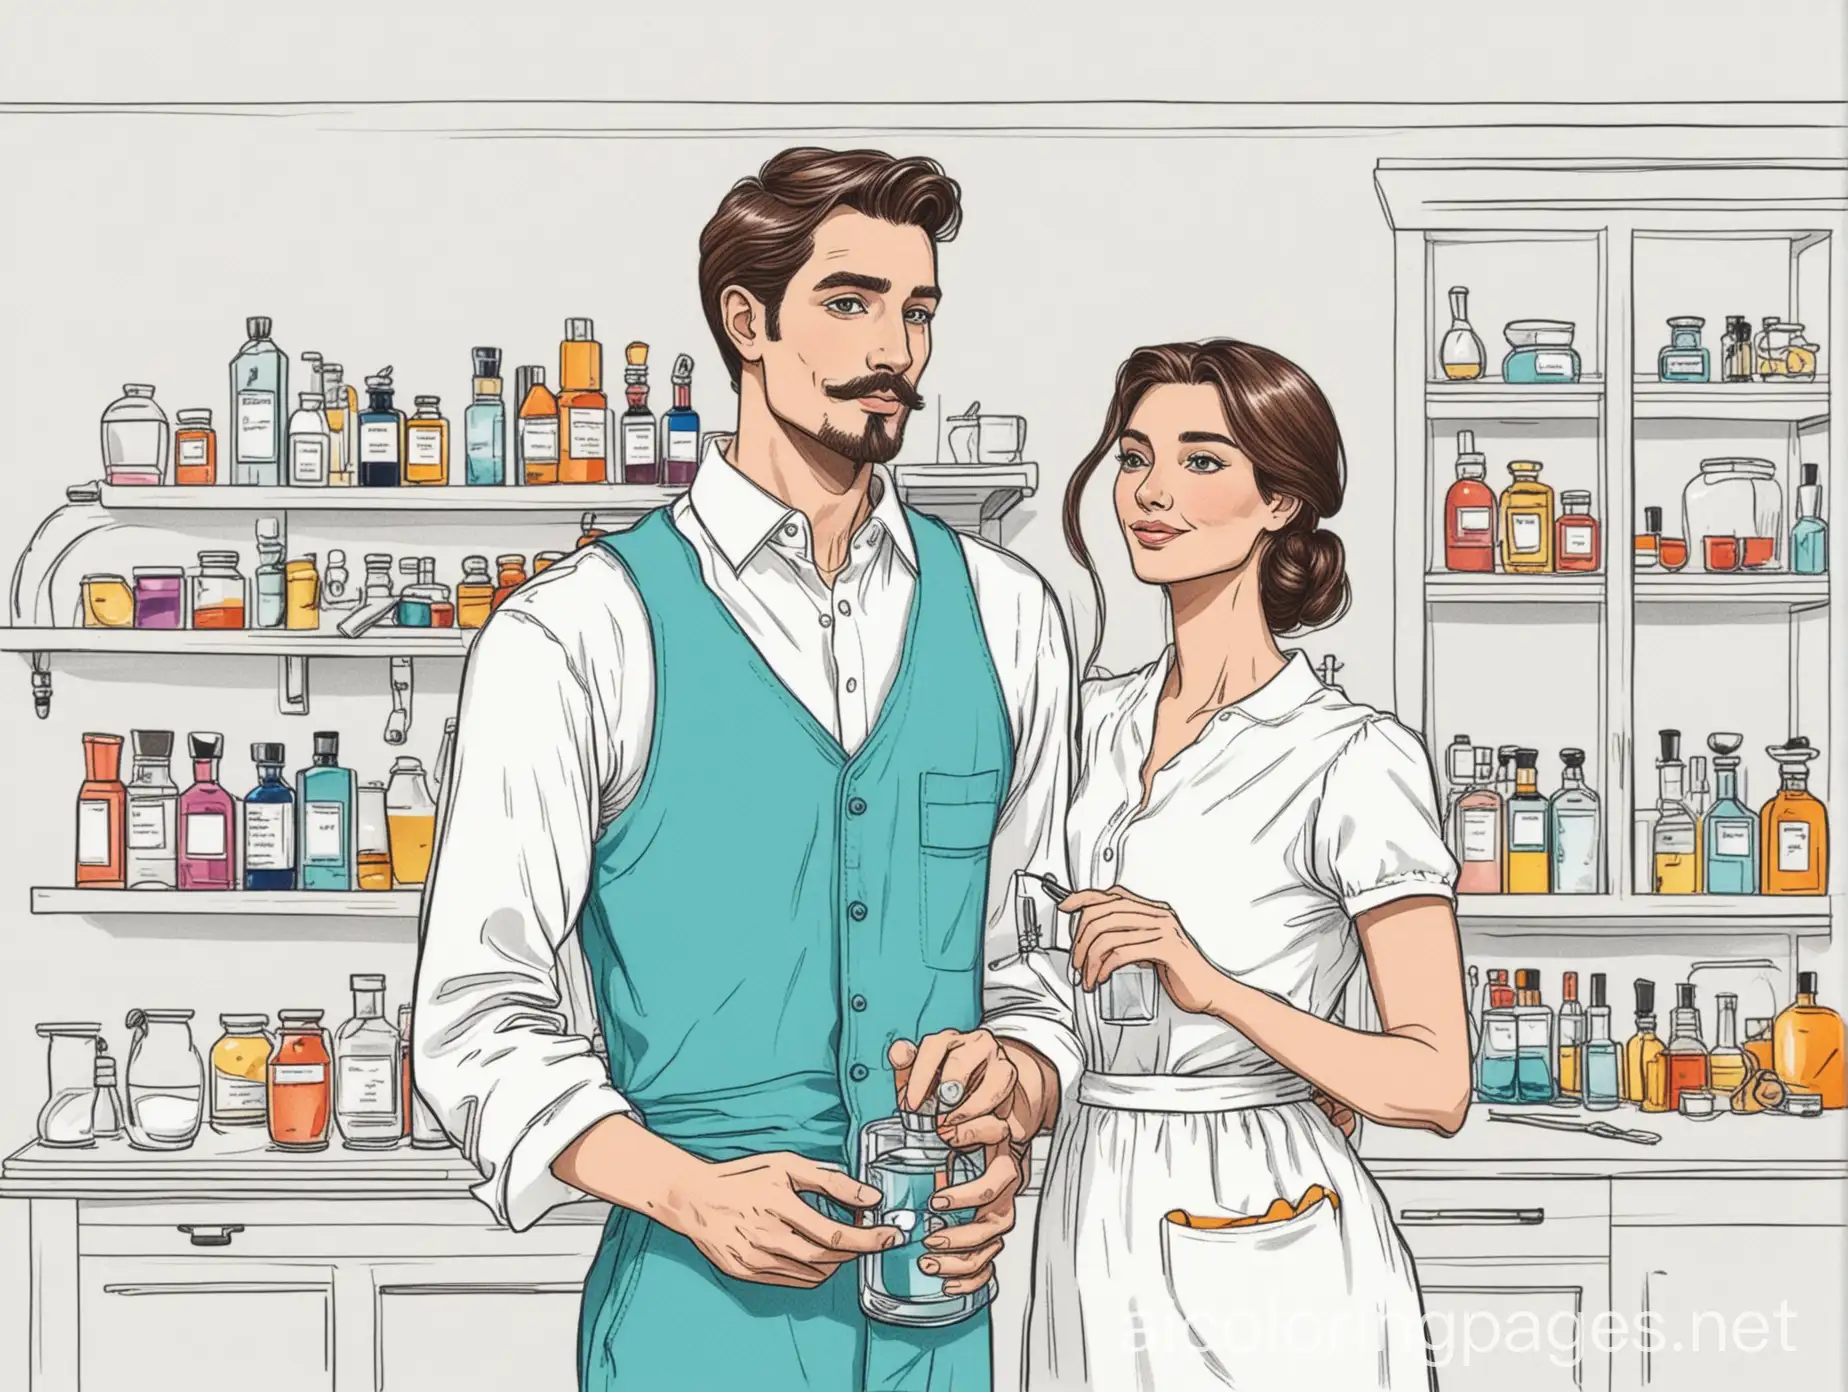 Perfumer-Working-in-Brightly-Colored-Home-with-Wife-Coloring-Page-in-Line-Art-Style